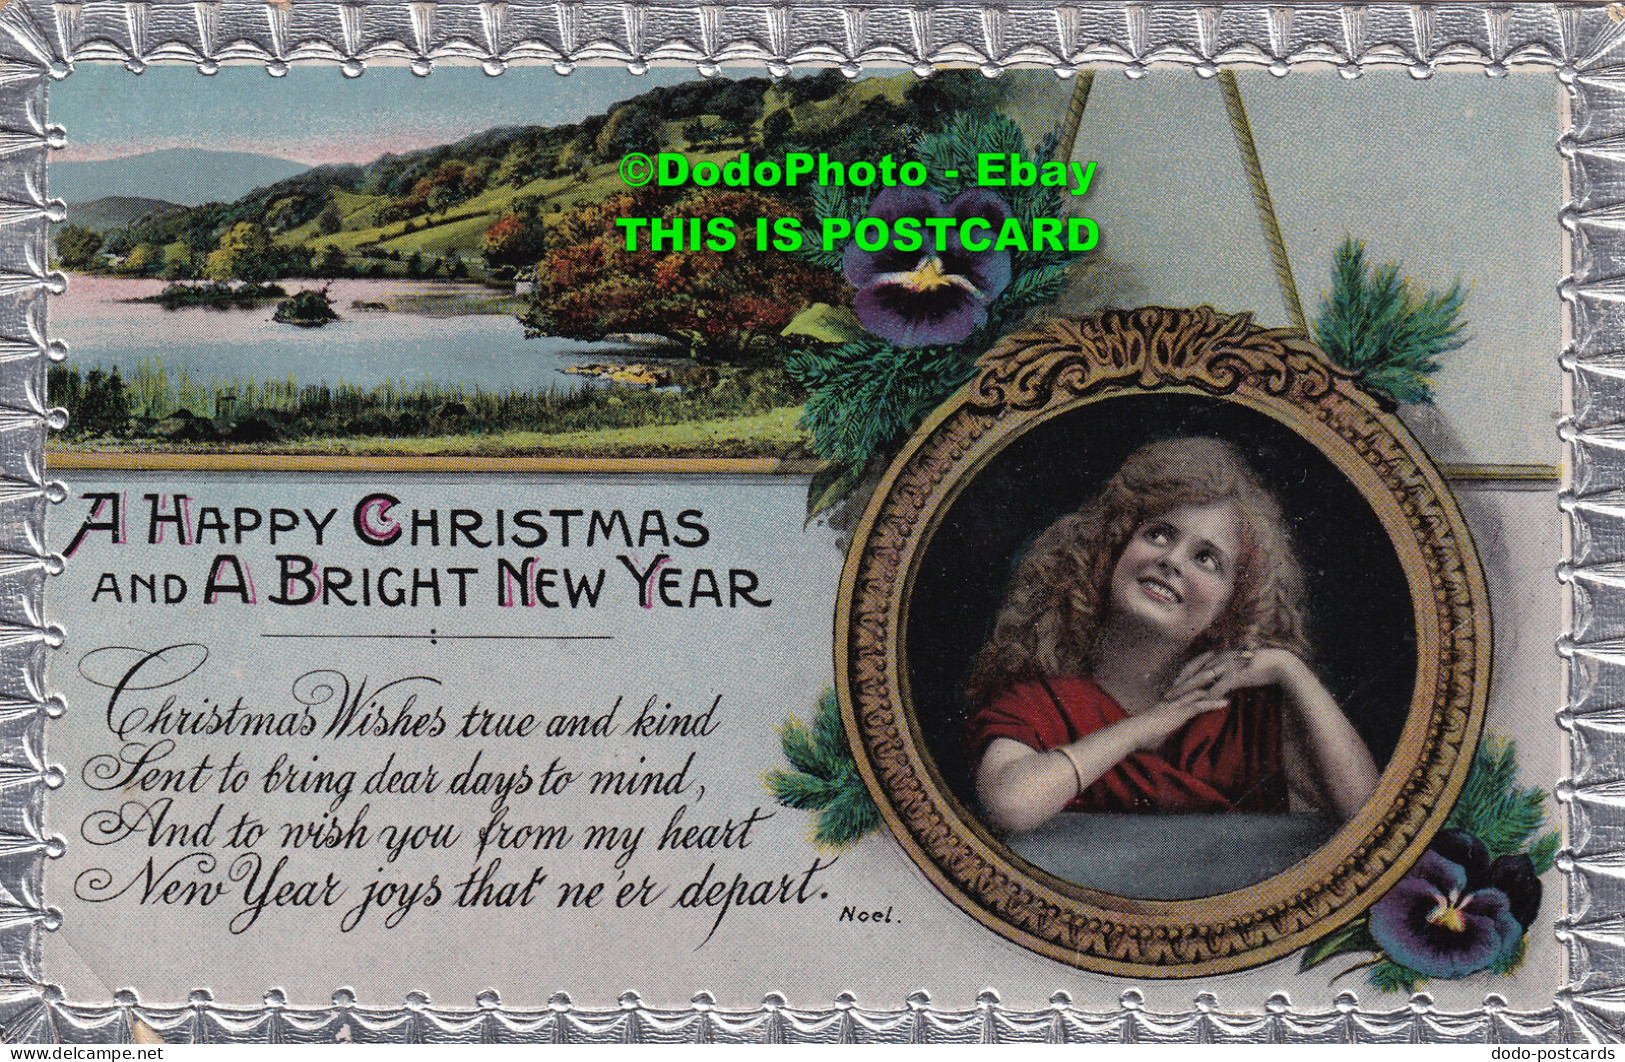 R455666 A Happy Christmas And A Bright New Year. Christmas Wishes True And Kind - World